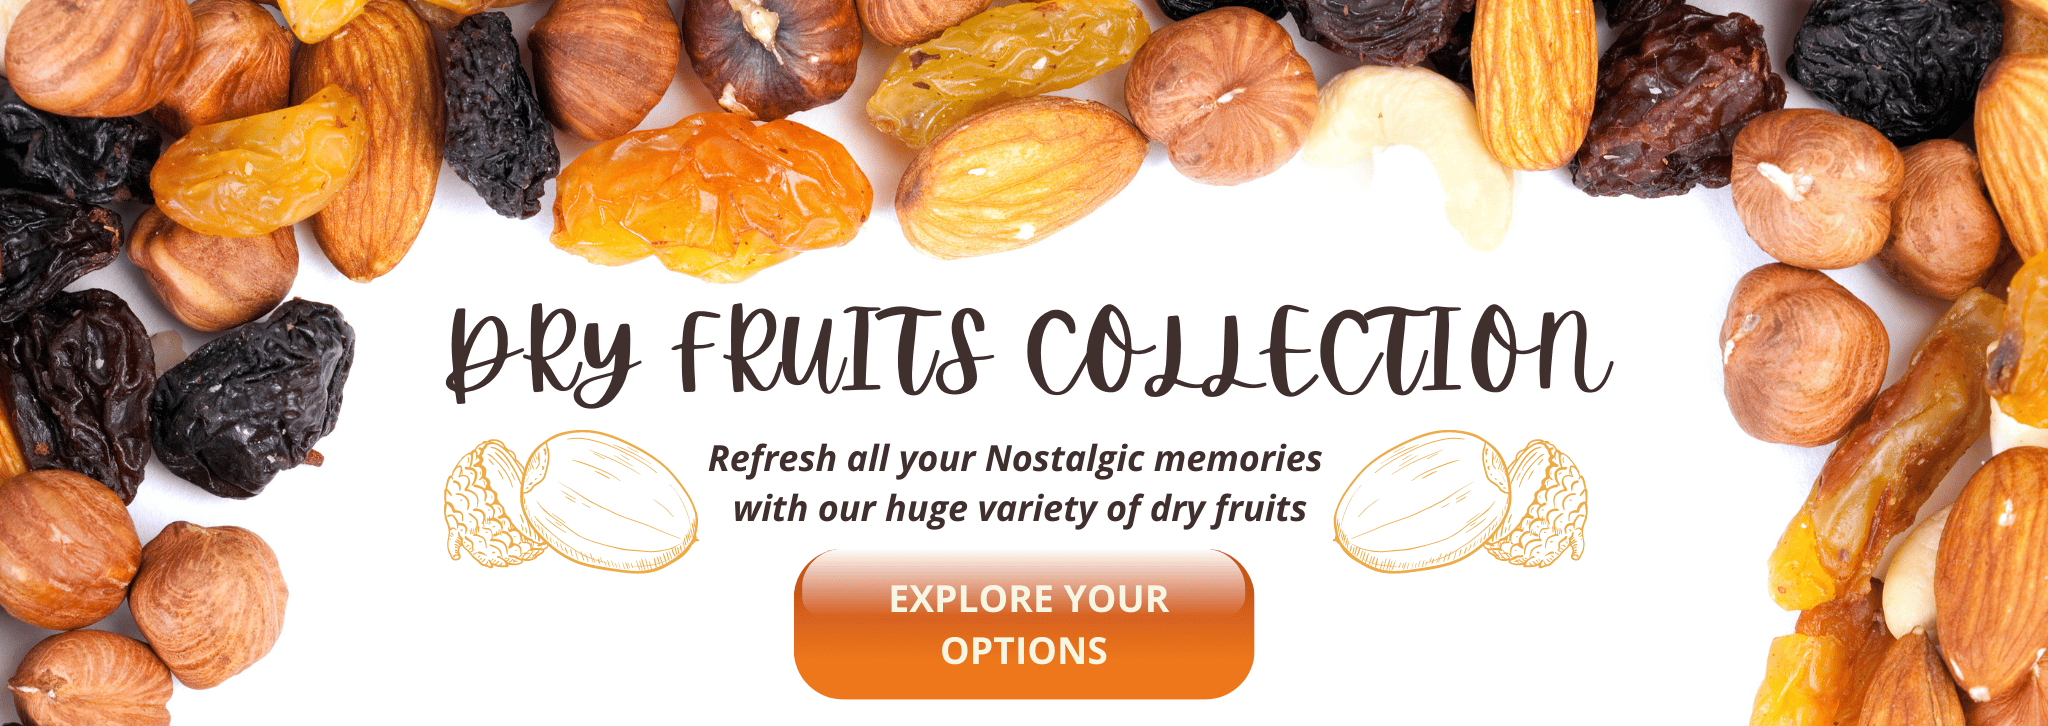 Dry Fruits Collection